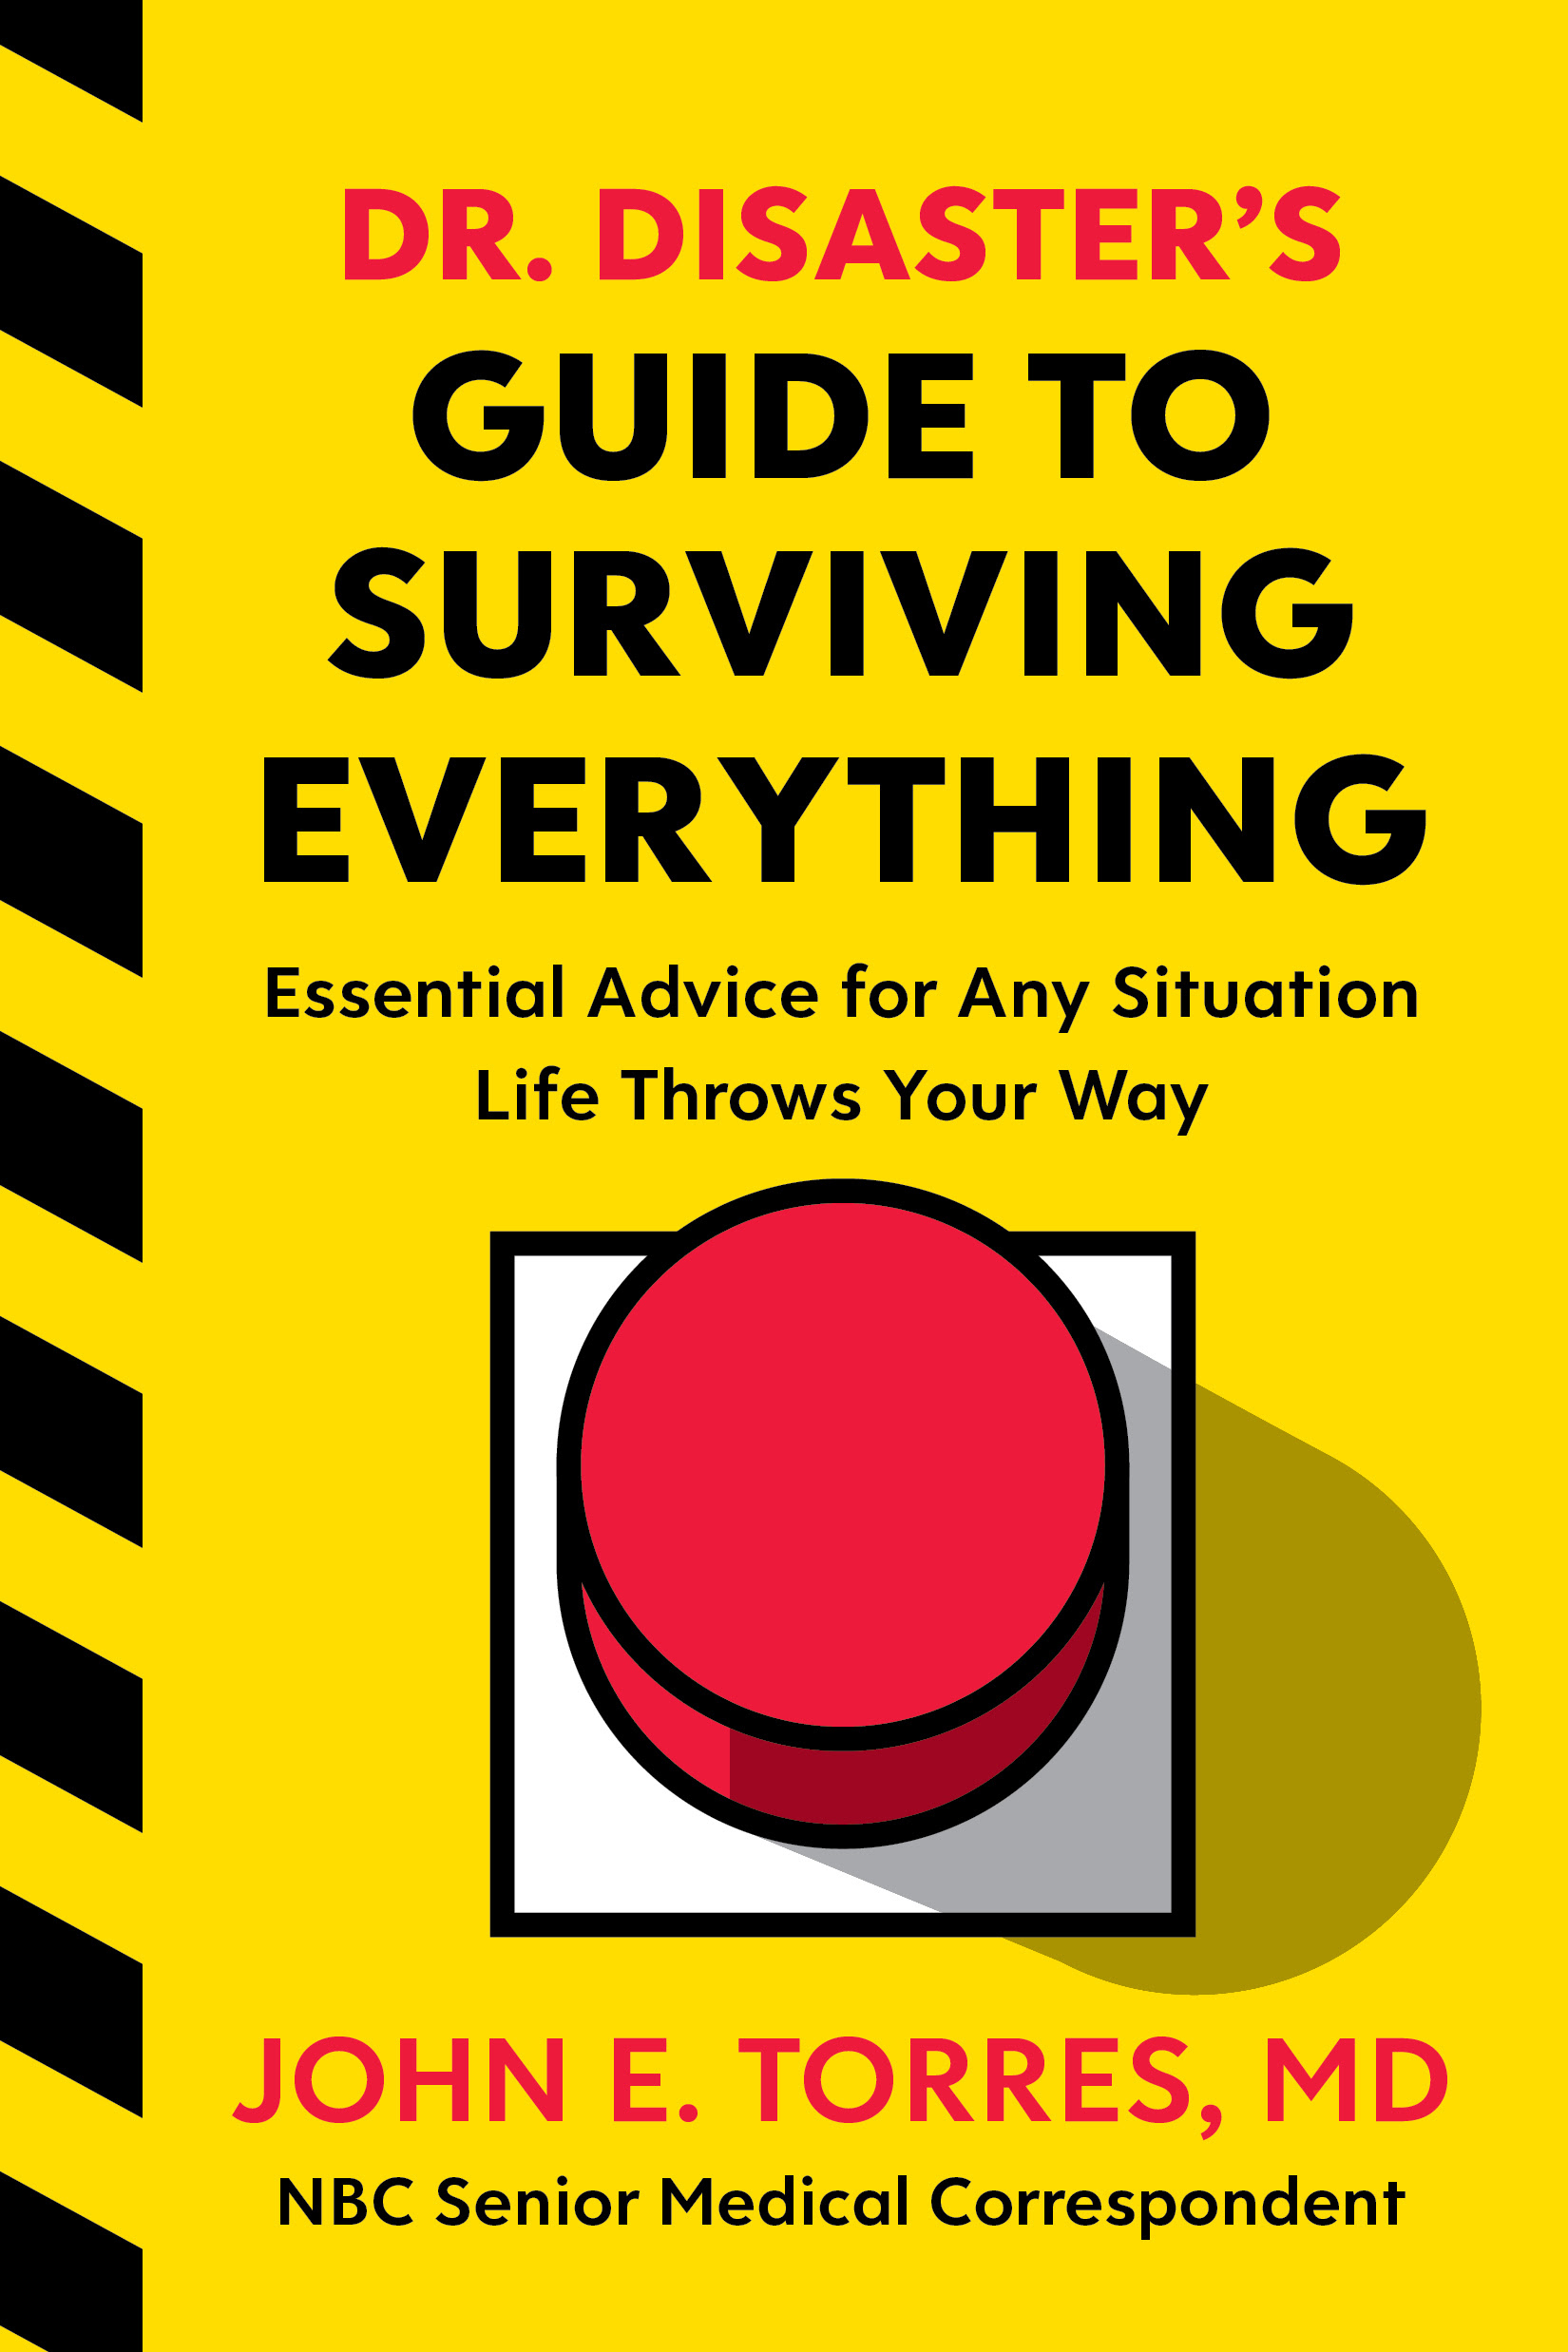 Dr. Disaster's Guide to Surviving Everything: Essential Advice for Any Situation Life Throws Your Way in Kindle/PDF/EPUB